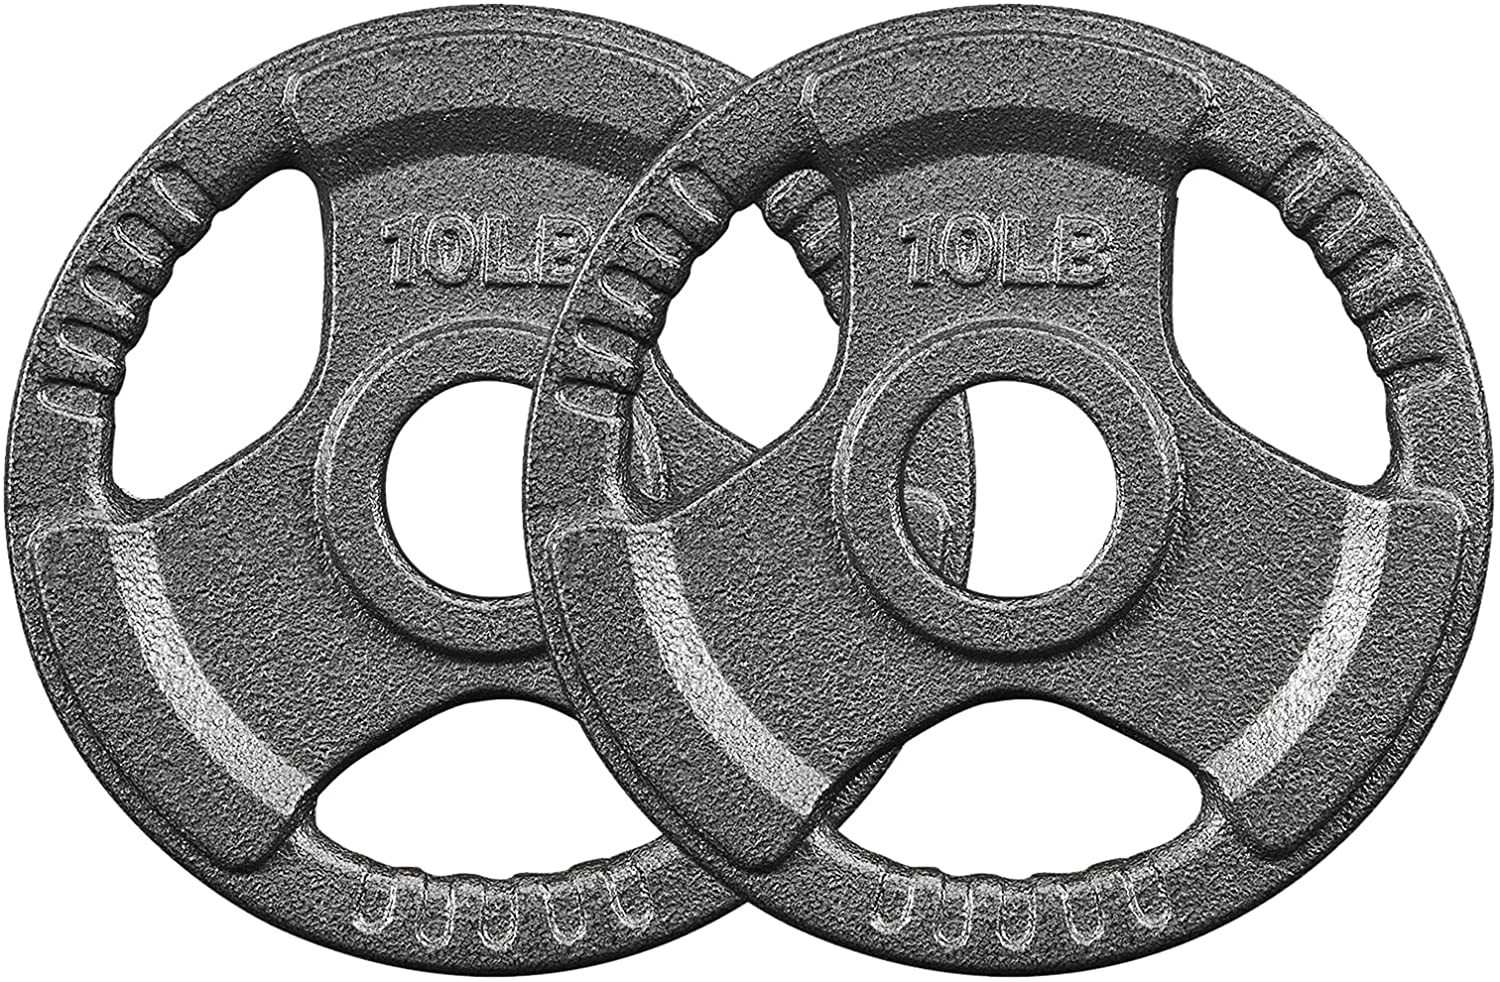 PITHAGE 2-inch Standard Grip Weight Plates Cast Iron Strength Training for Barbell -   Vigbody